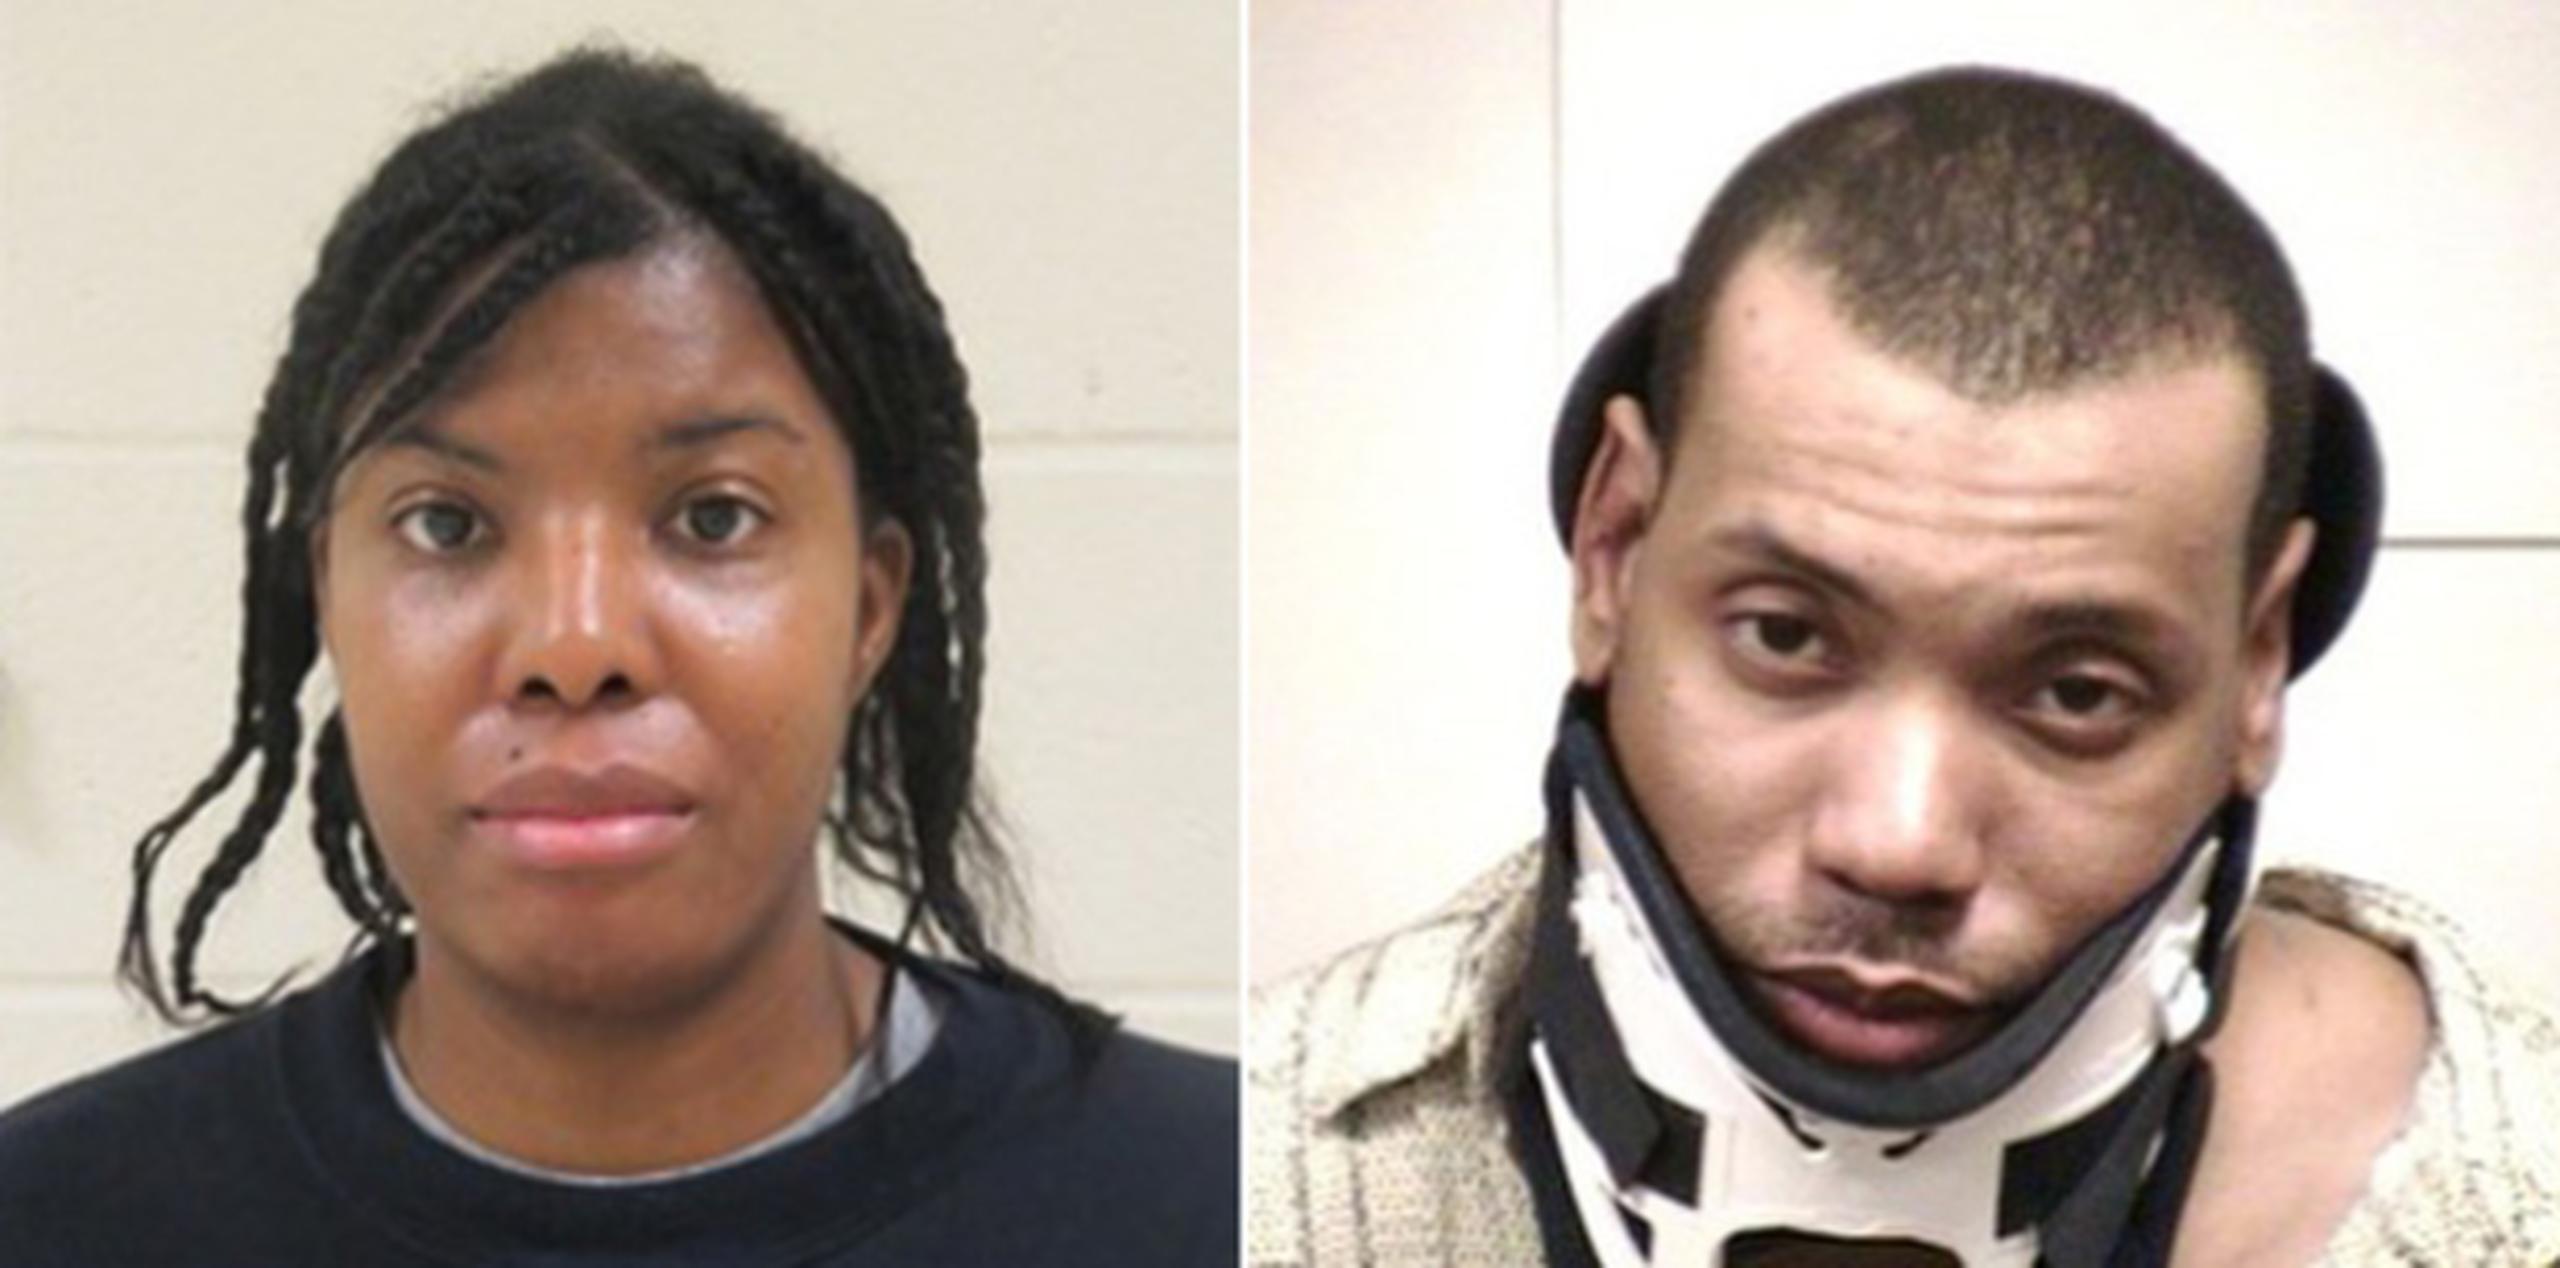 Anika George y Andre Boynton. (Cuyahoga County Sheriff's Department)